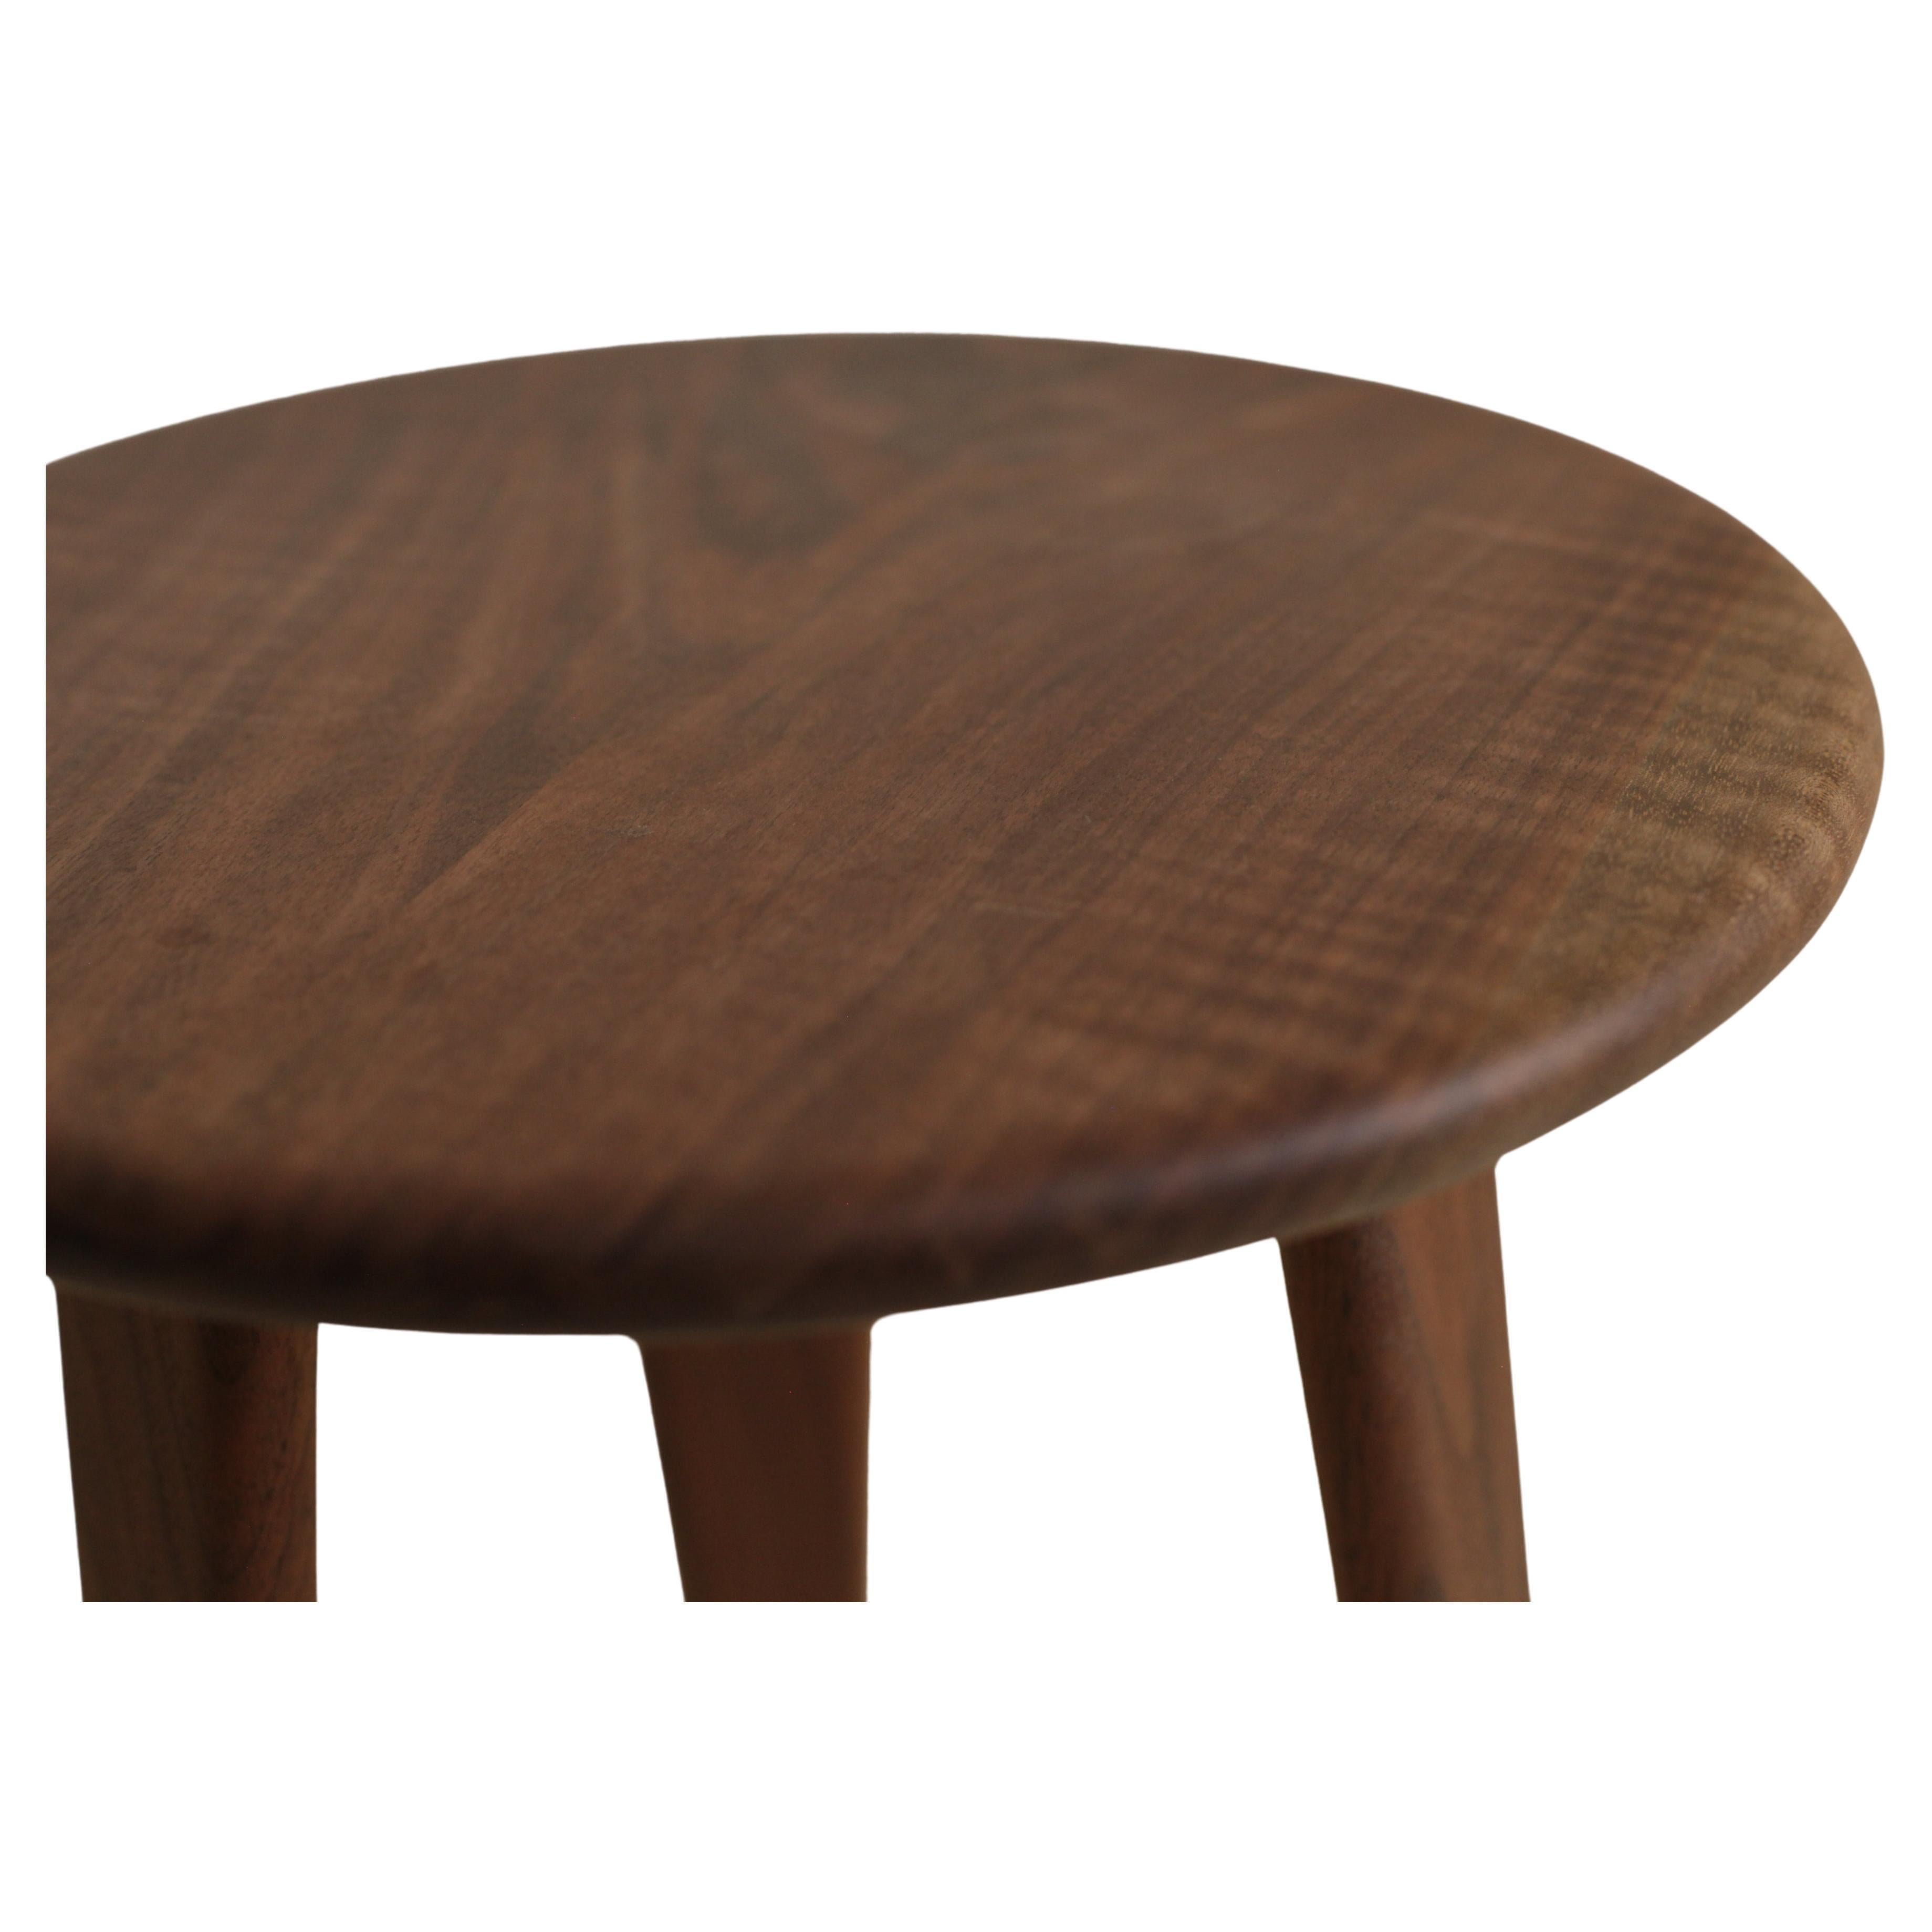 Hand-Crafted Bedside Table in Walnut and Ash by Boyd & Allister For Sale